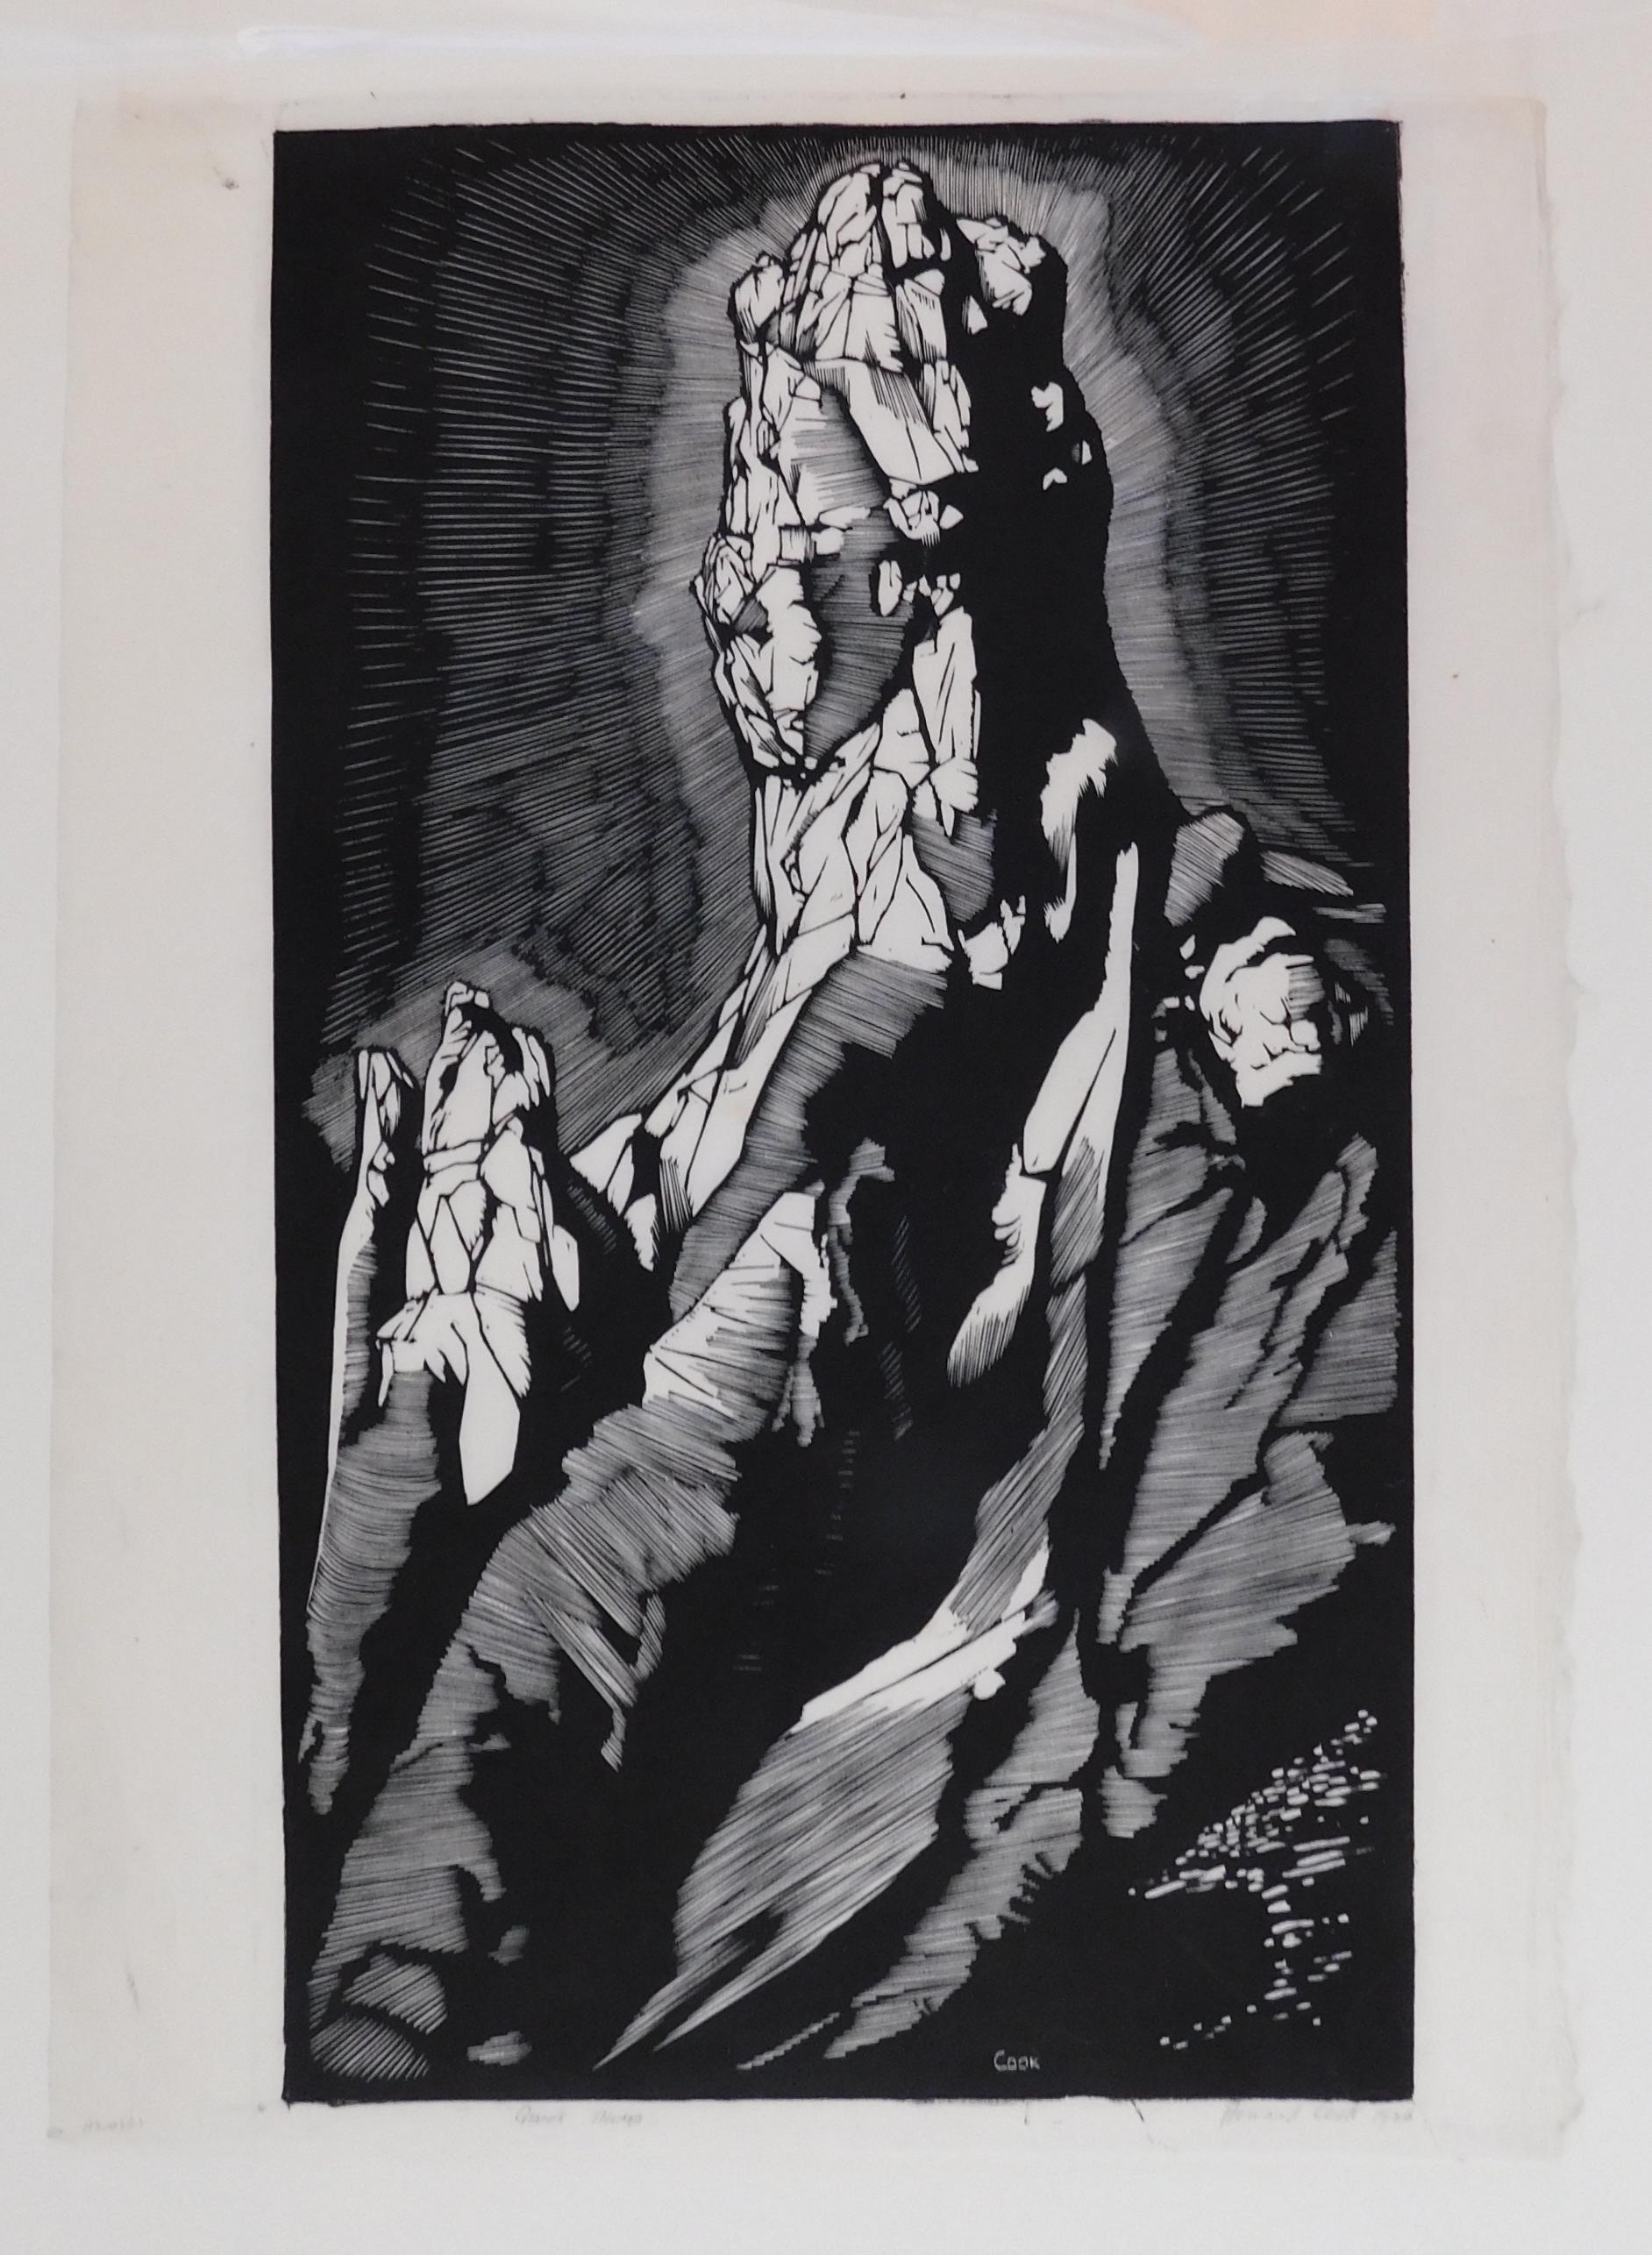 Wonderful woodblock by Taos artist Howard Cook (1901-1980).
Titled: “Giant’s Thumb” (alternate title: Monument Rock).” Edition: 50.
Image size: 14